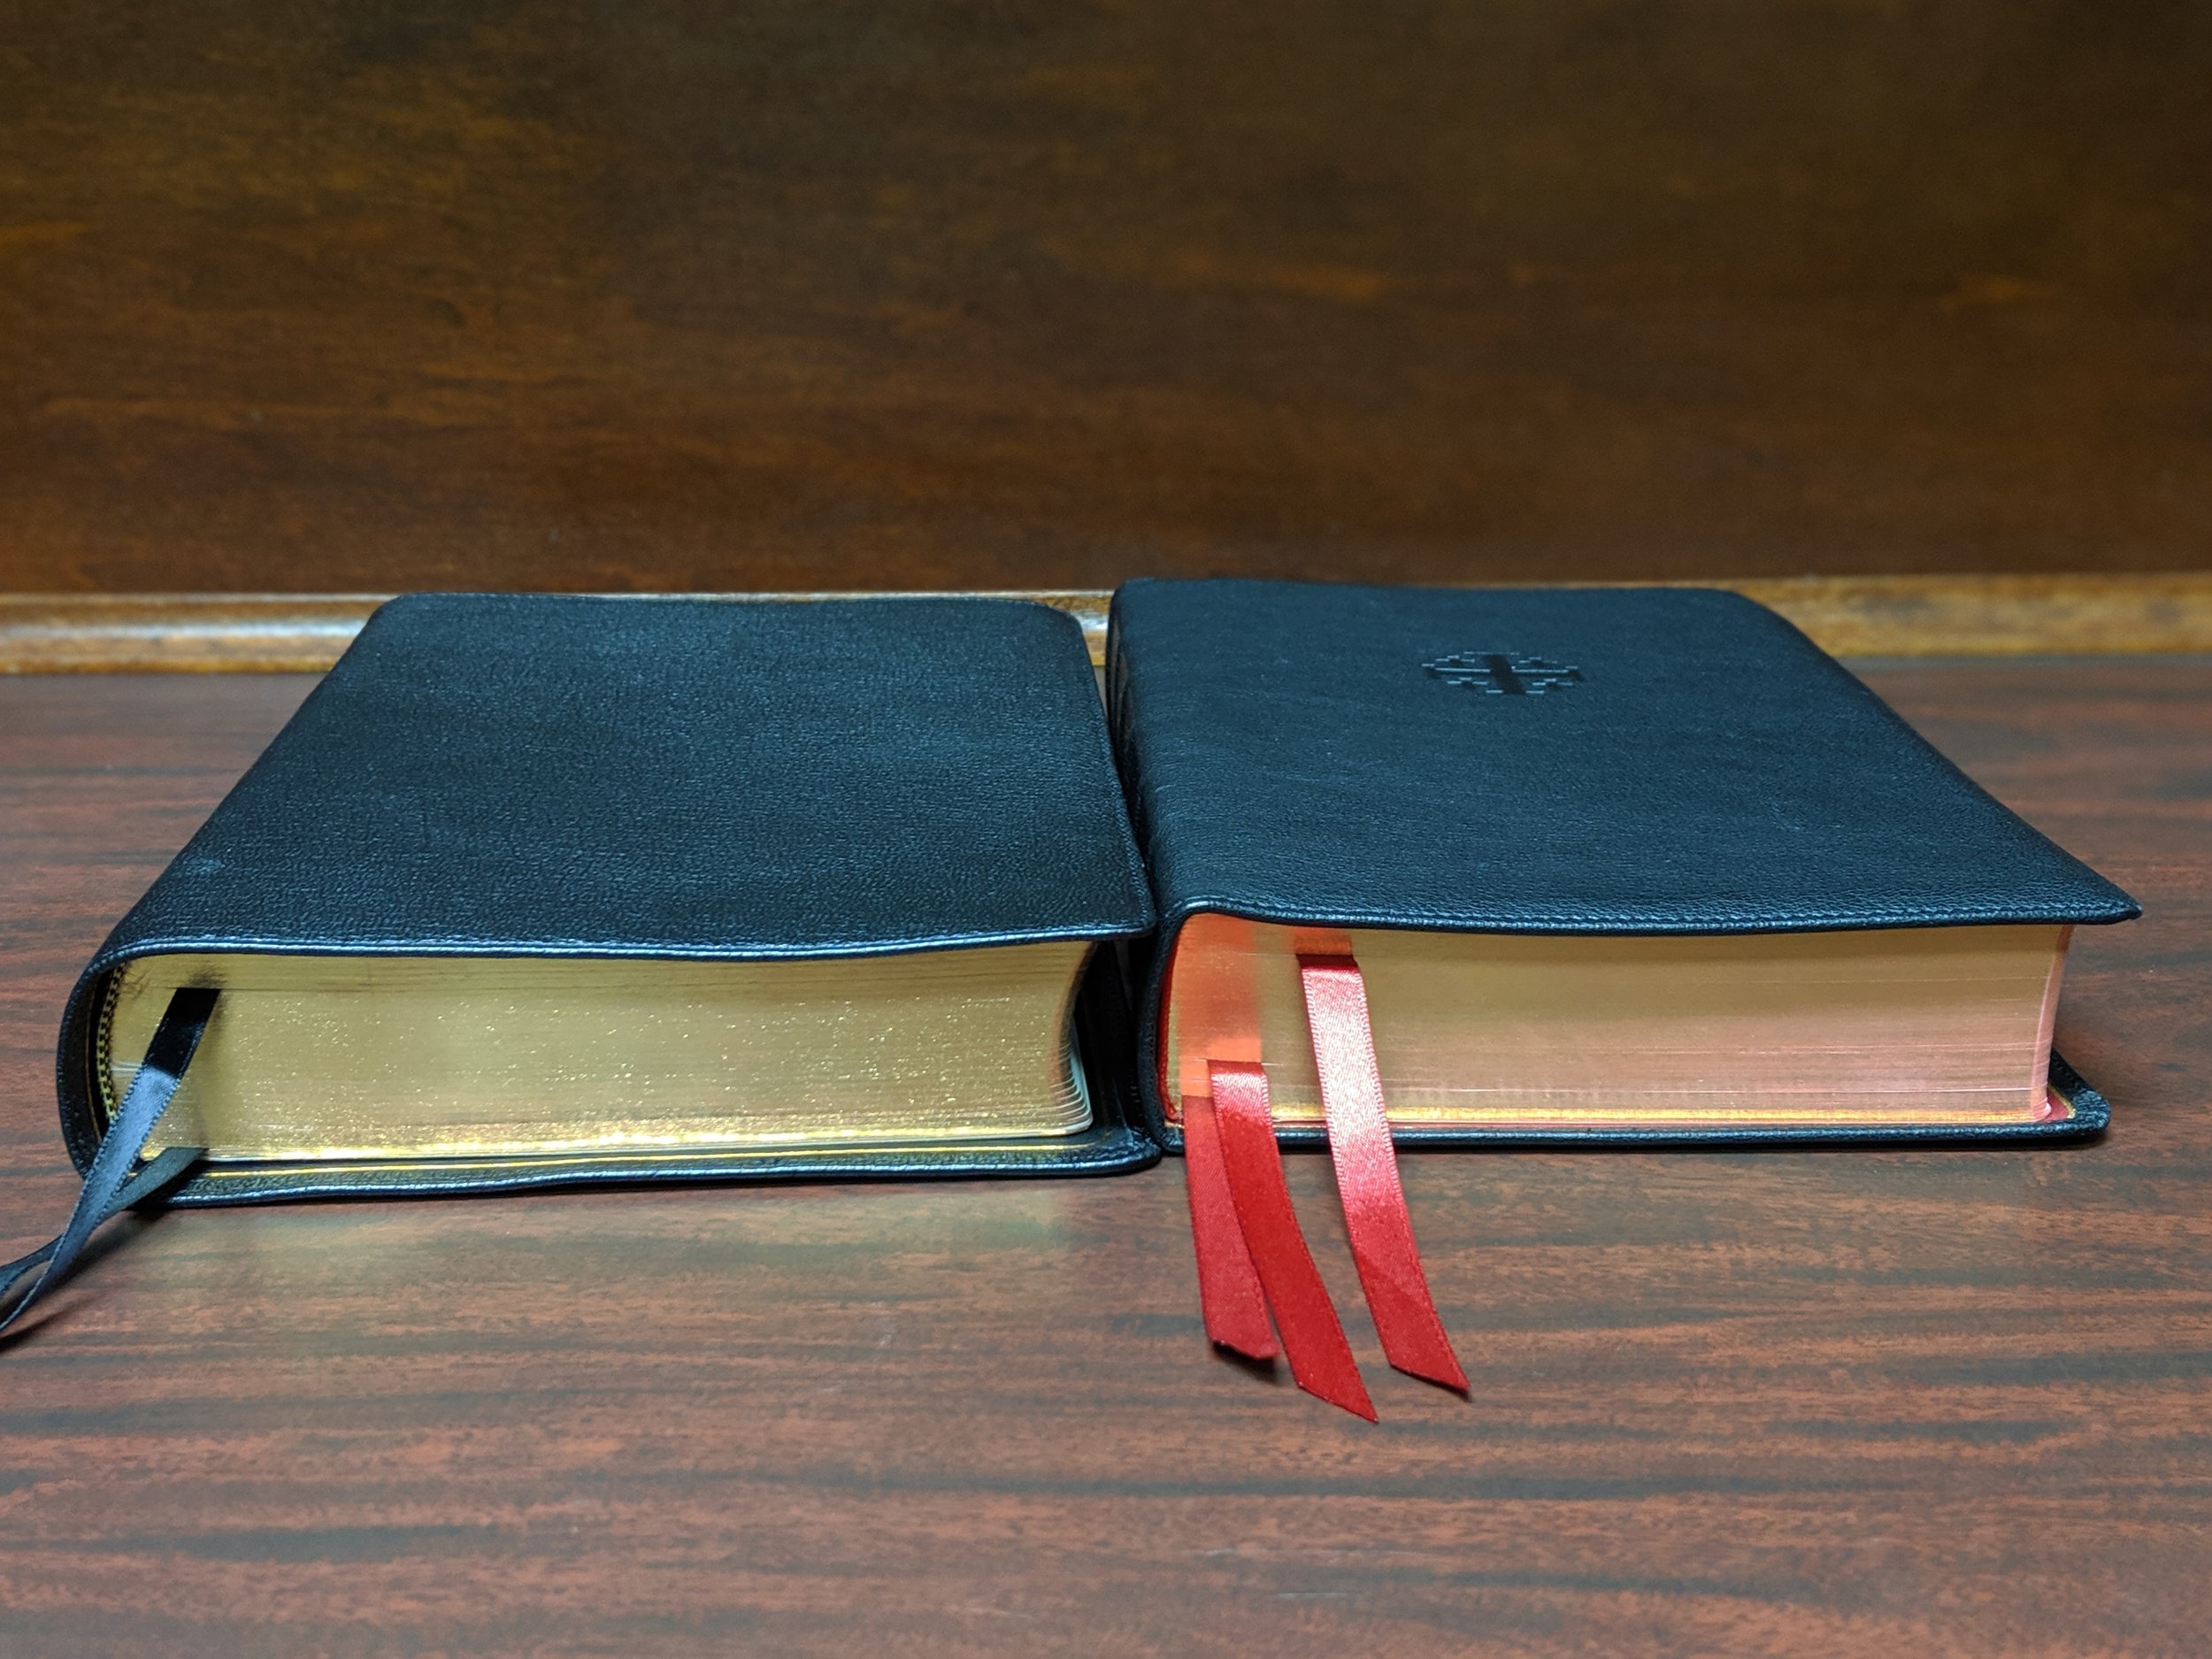  Side by side - ESV Preaching Bible (left); Credo Quentel (right) 